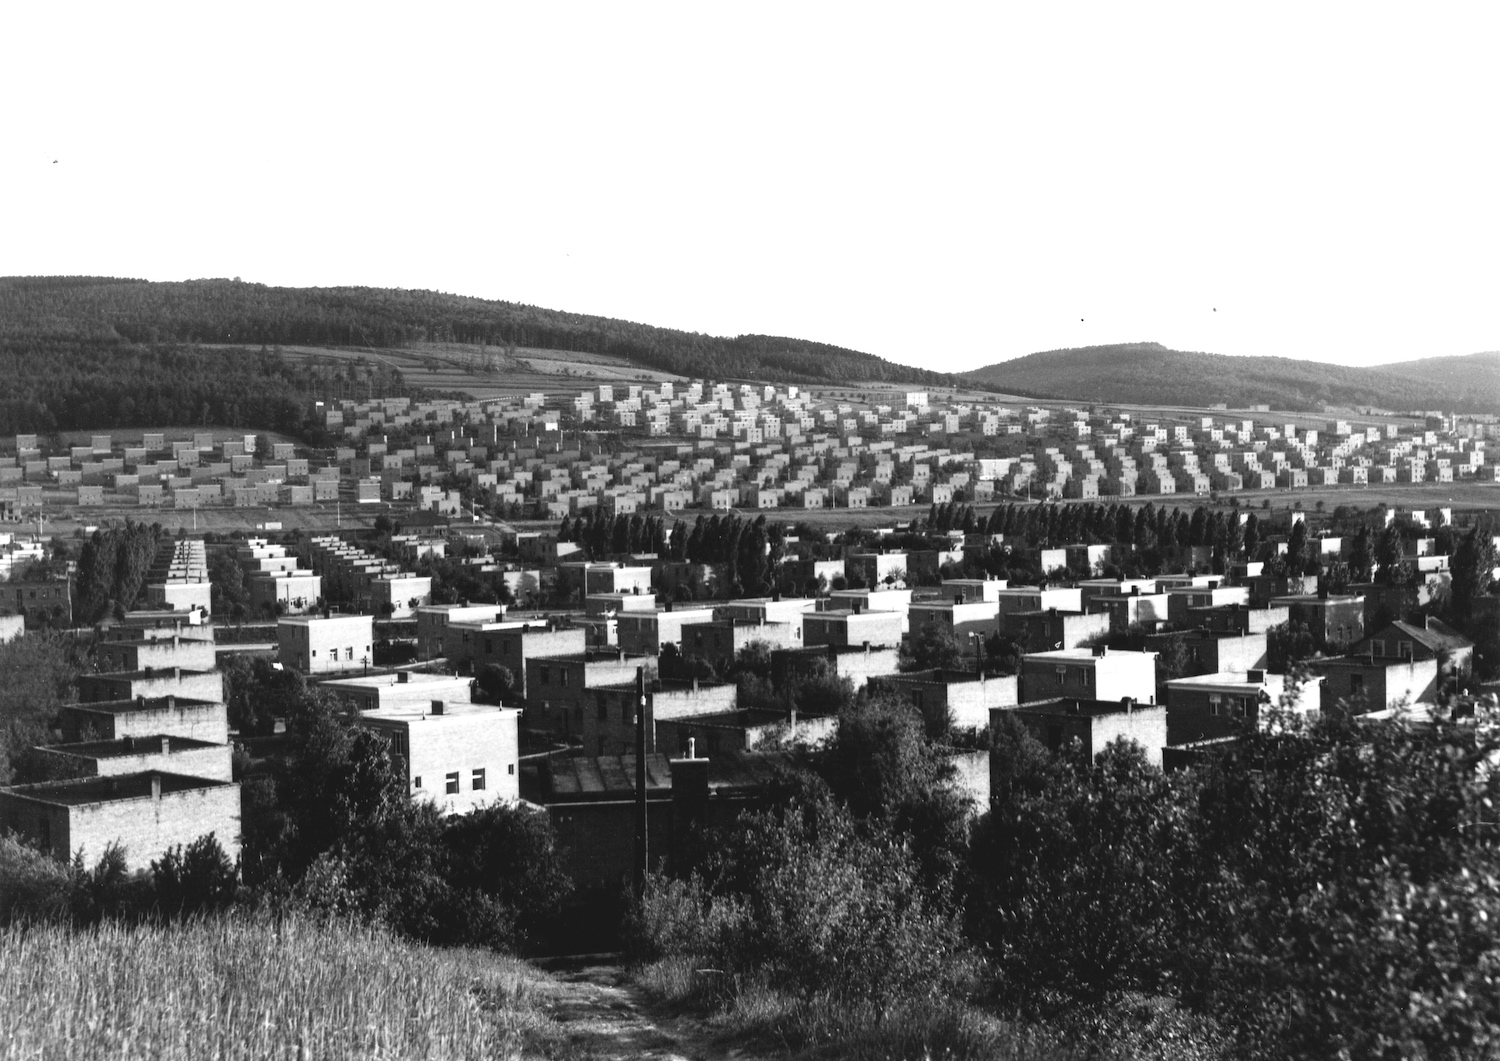 Photo of the workers' colony in the city of Zlín. Image: The Tomas Bat'a Foundation/Wikimedia Commons used a CC licence 